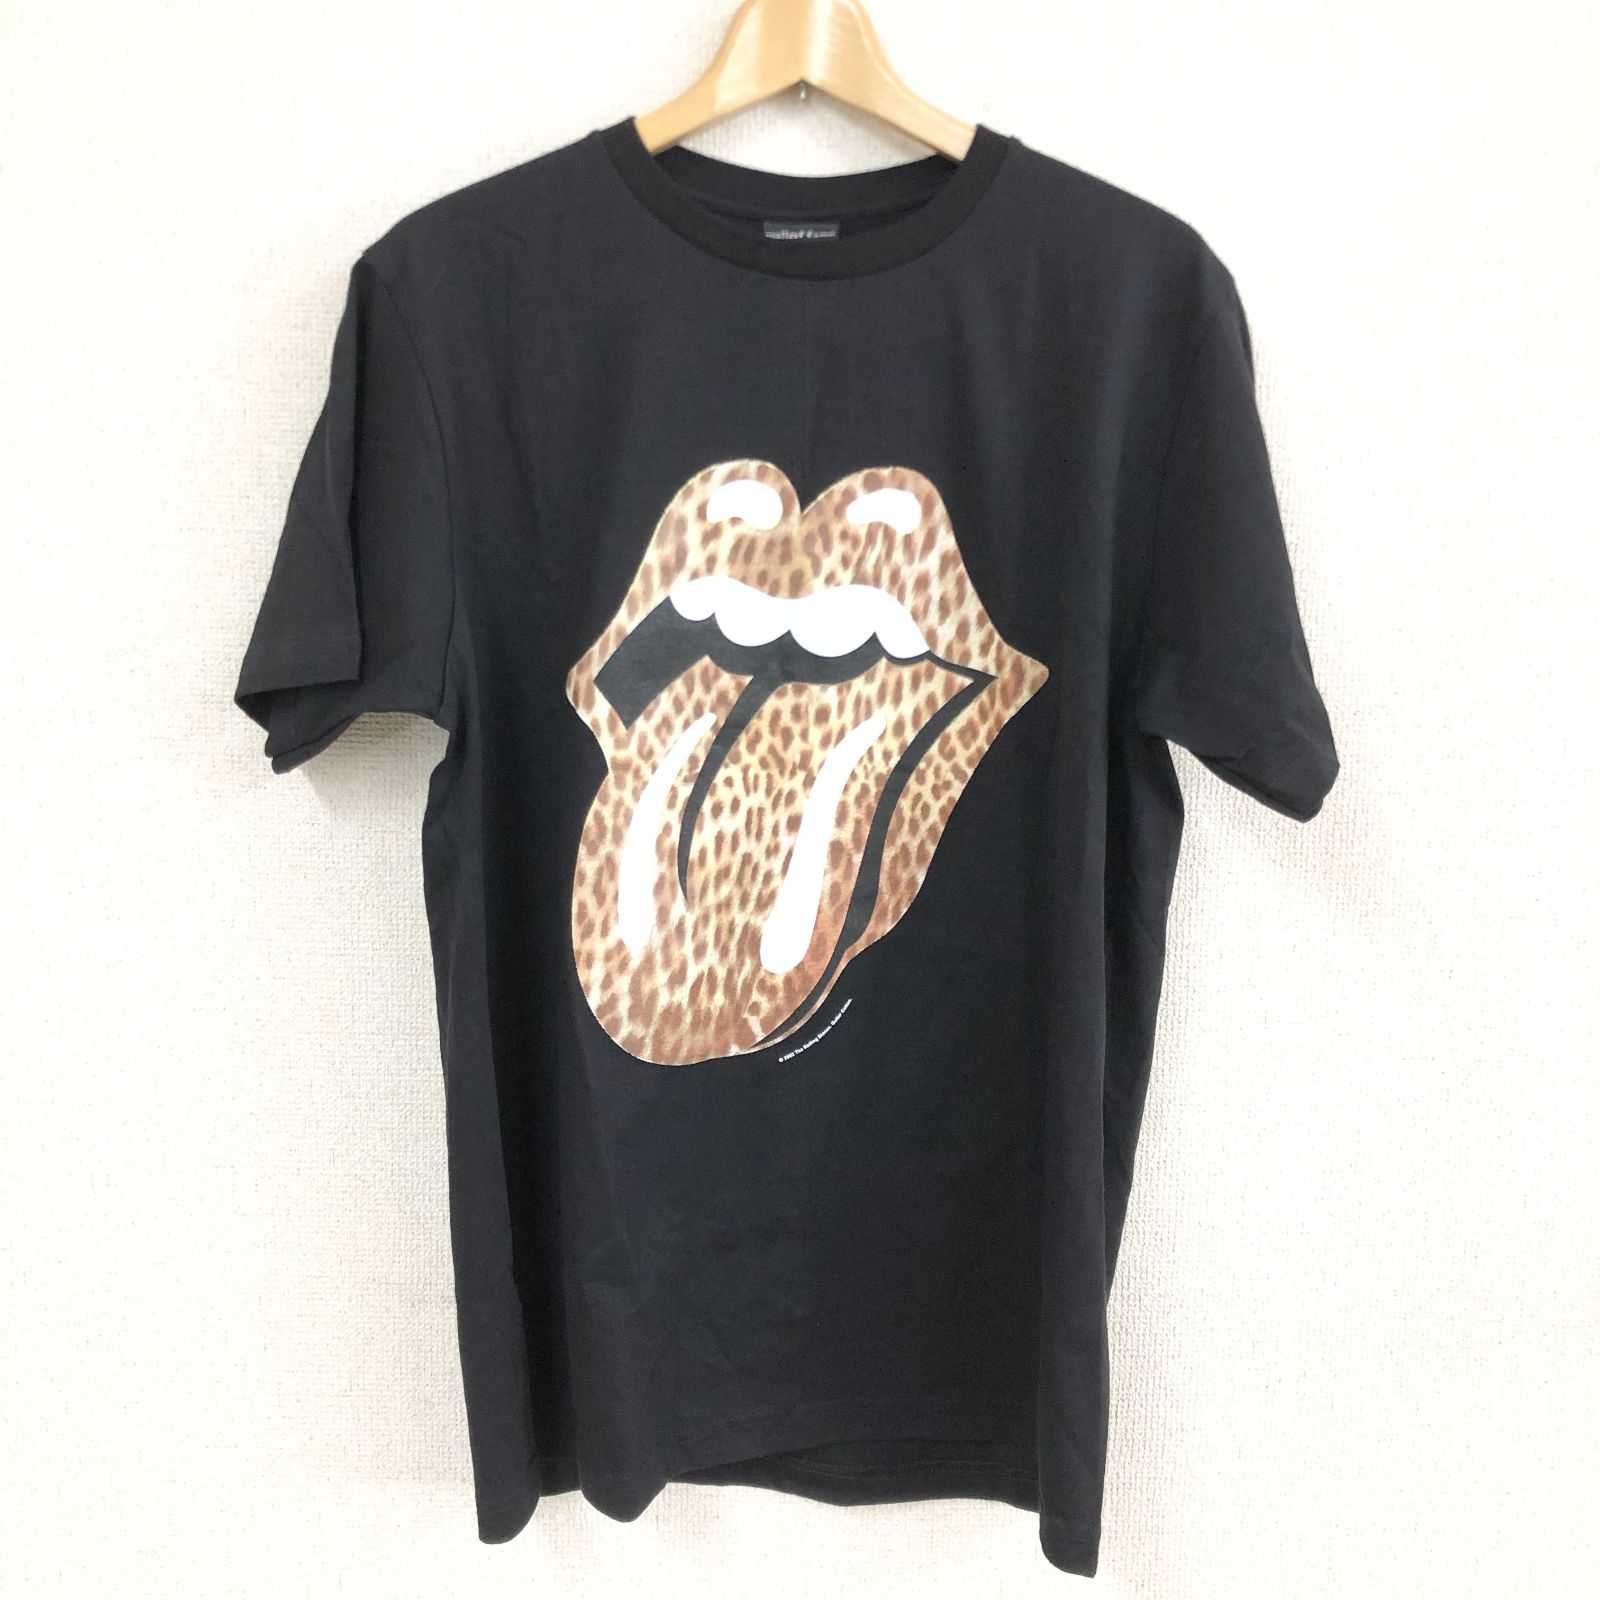 wall of fame バンドTシャツ The Rolling Stones ザローリング